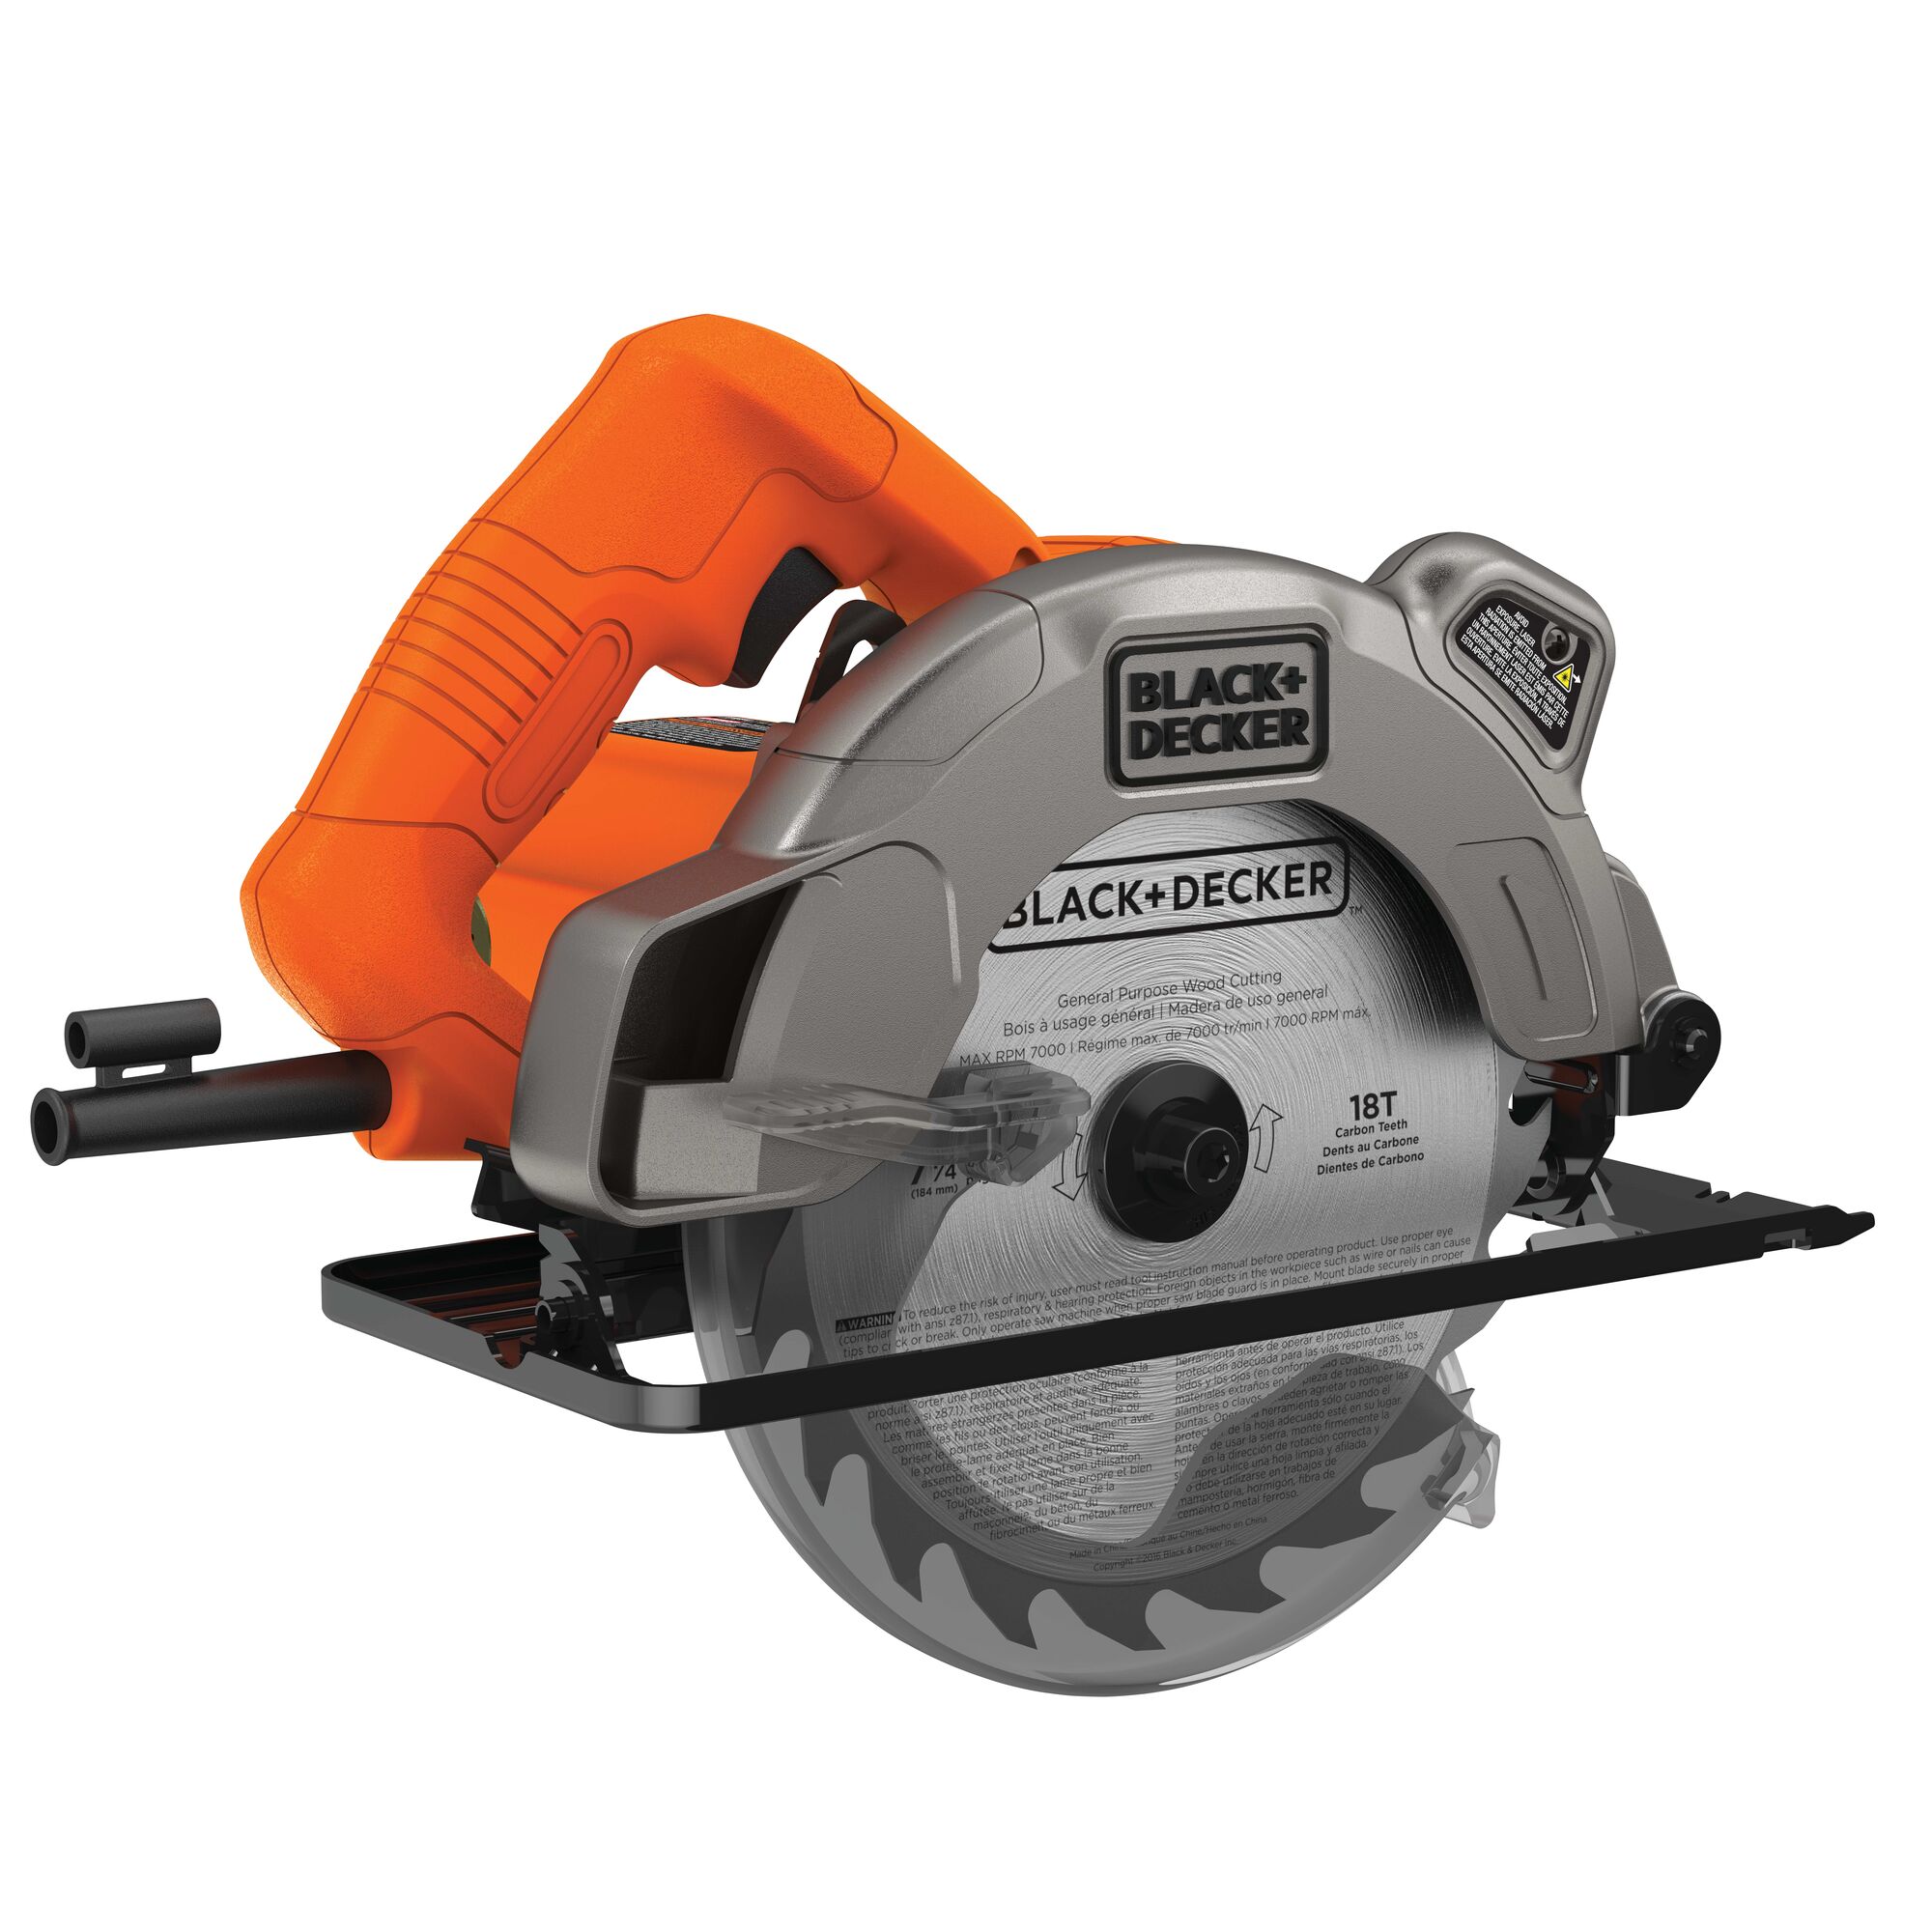 13 ampere circular saw with laser.